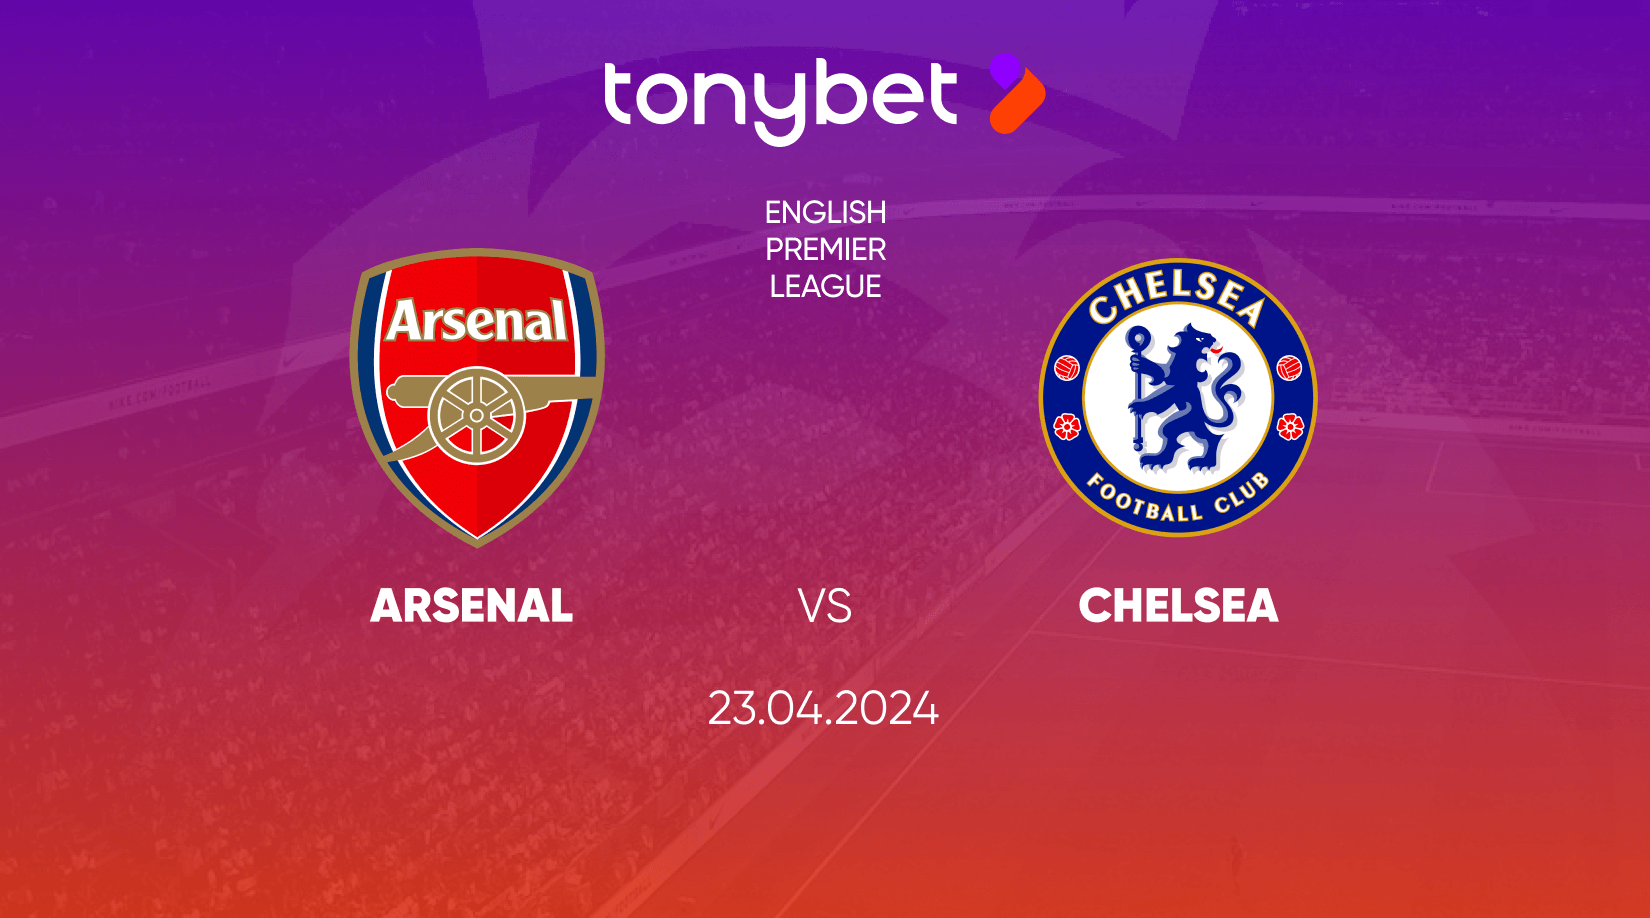 Arsenal vs Chelsea, Prediction, Odds and Betting Tips 23/04/2024